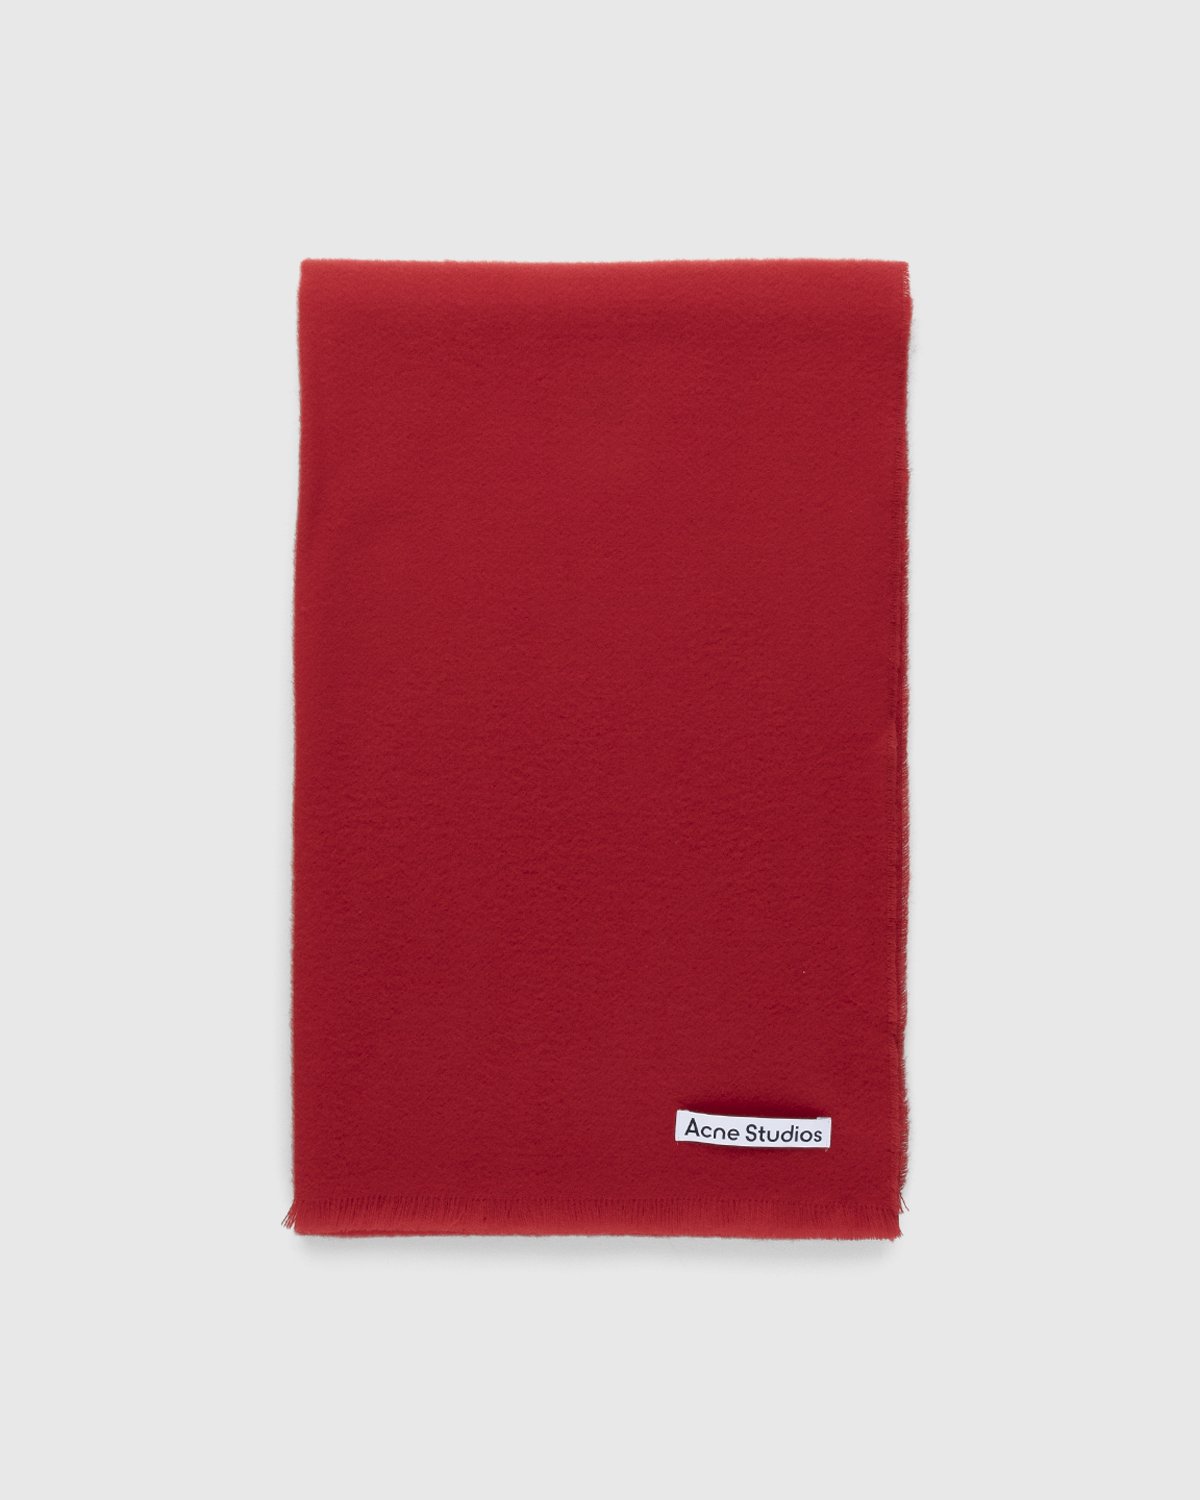 Acne Studios - Heavy Scarf Red - Accessories - Red - Image 2